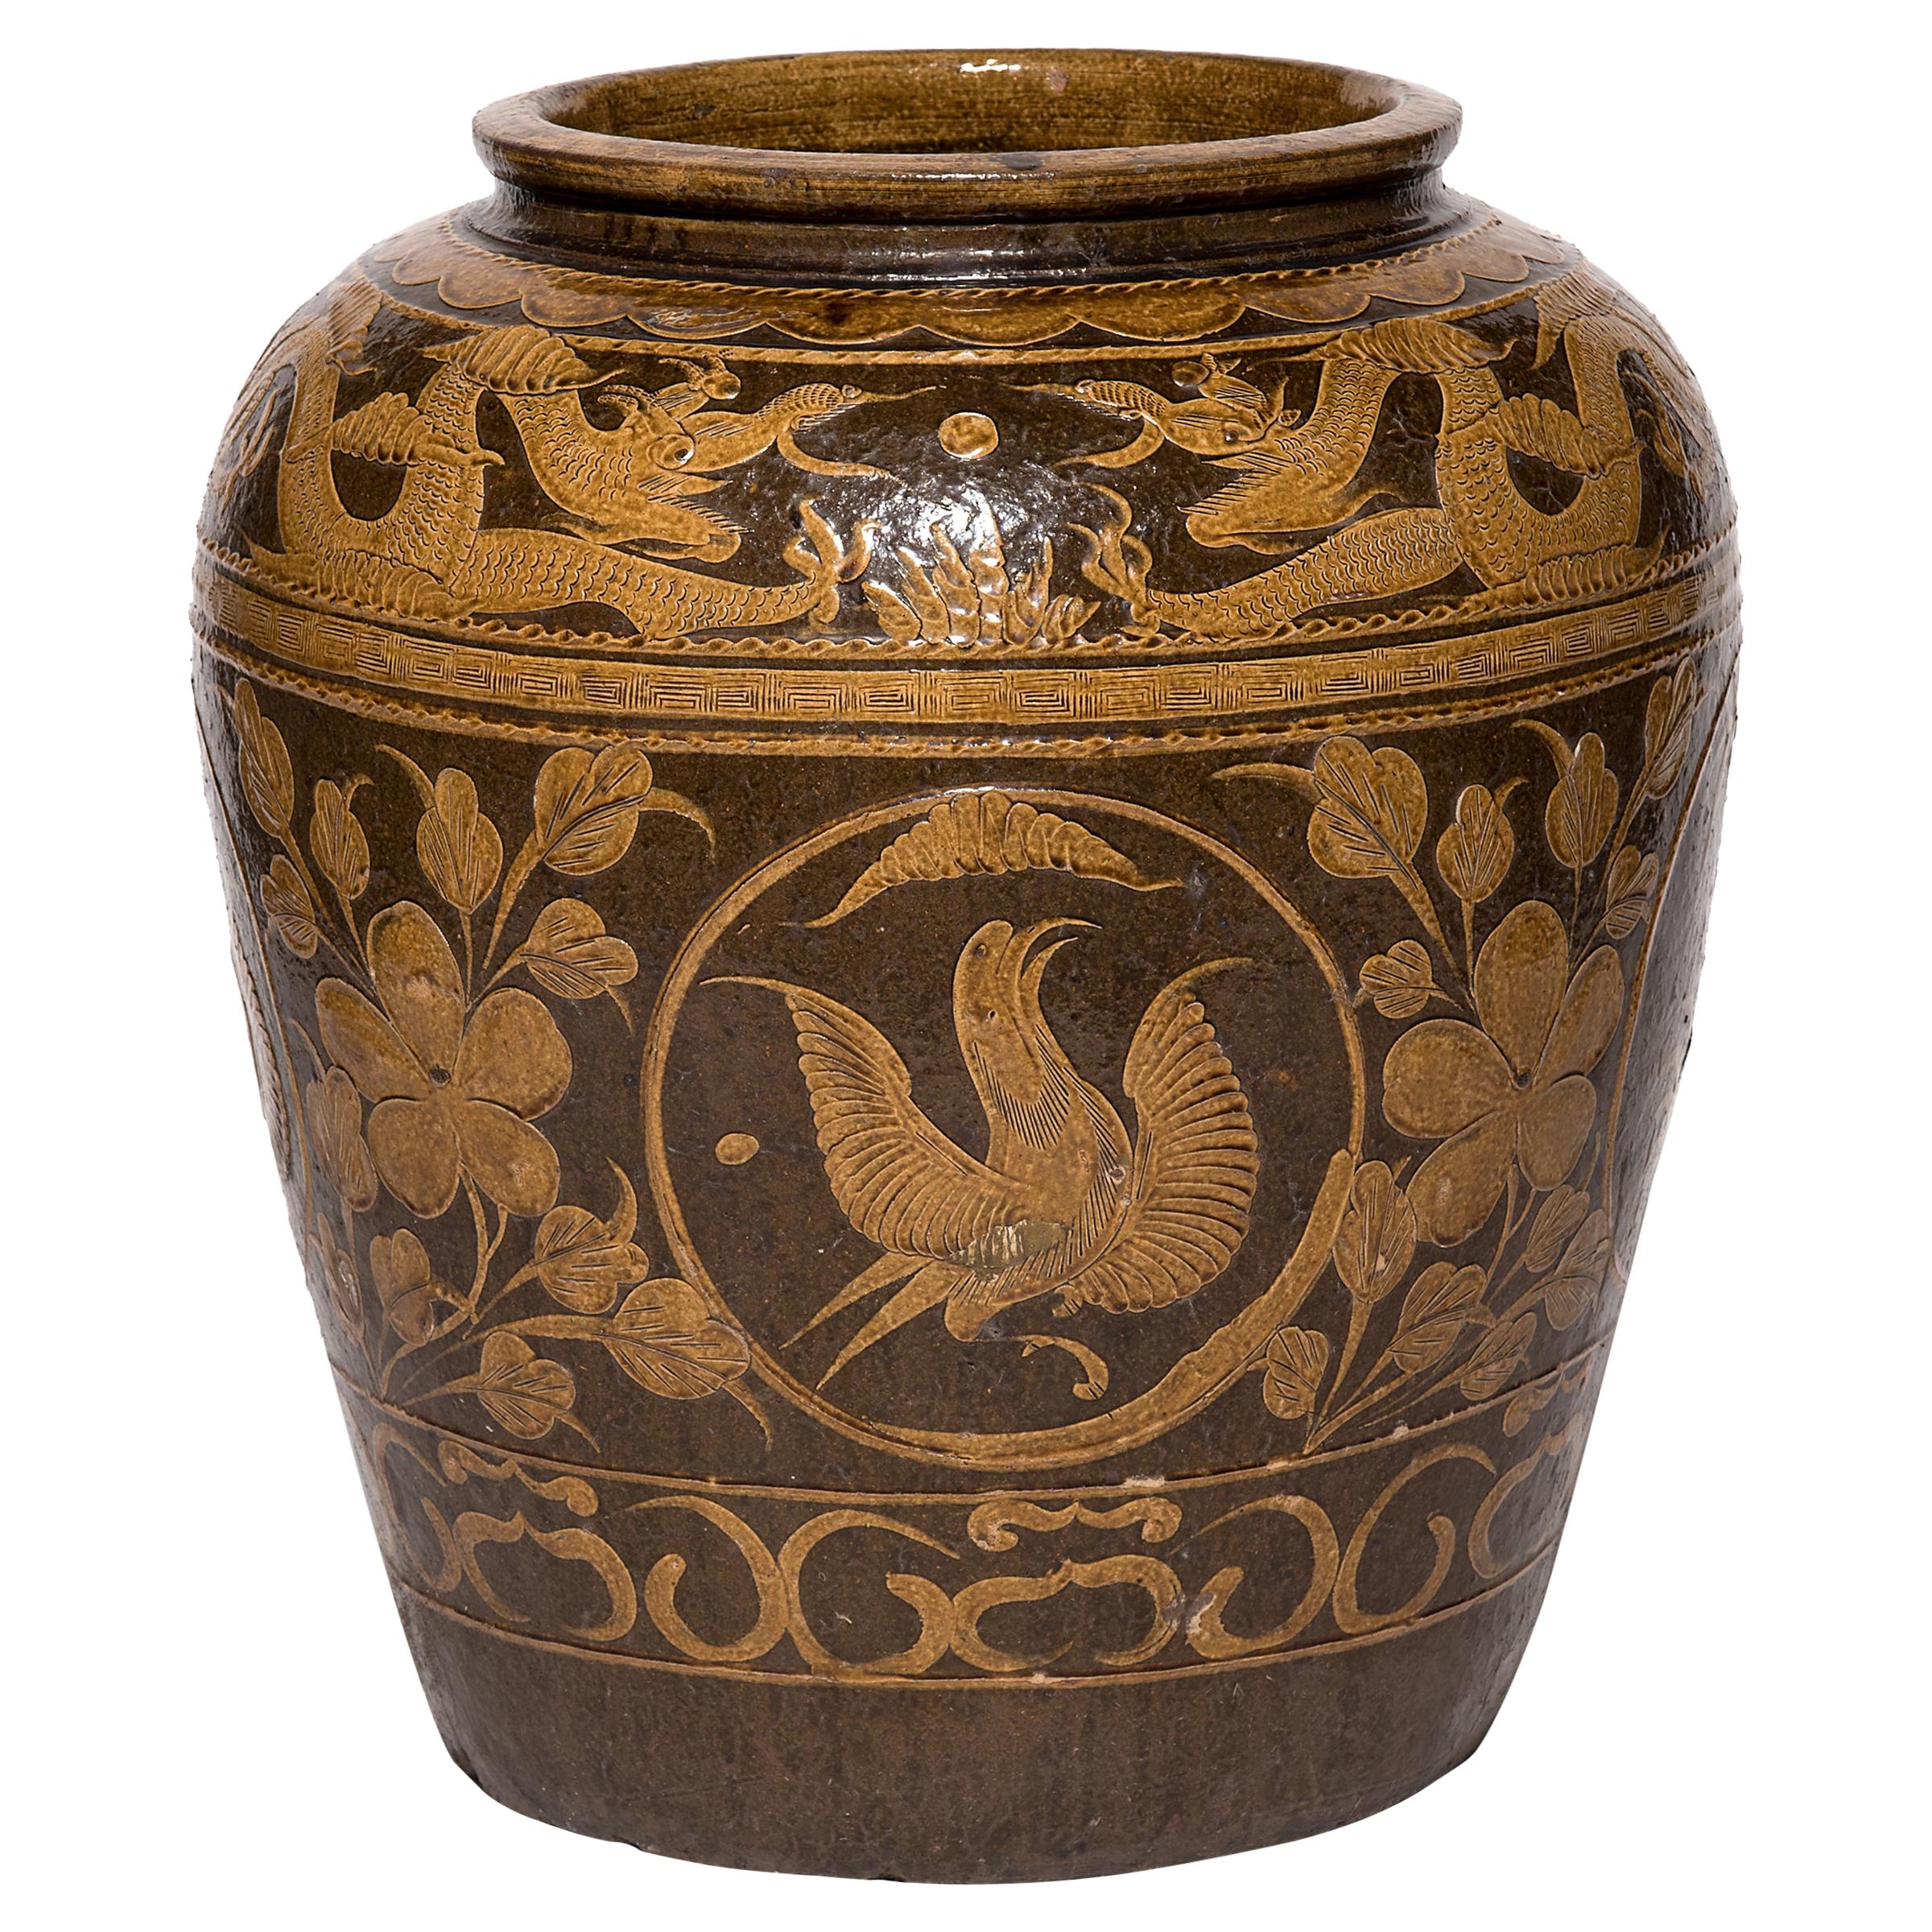 Early 20th Century Chinese Egg Jar